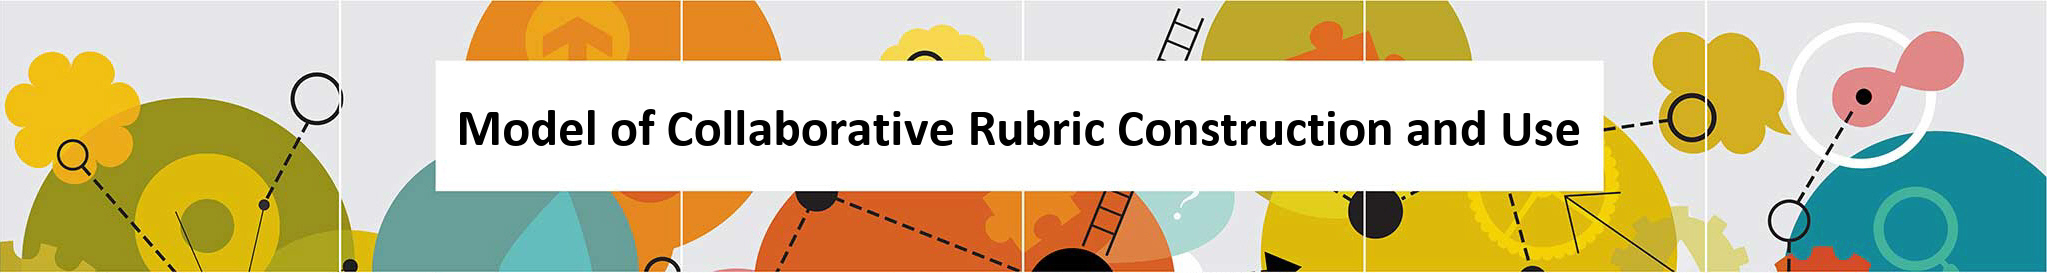 Model of Collaborative Rubric Construction and Use